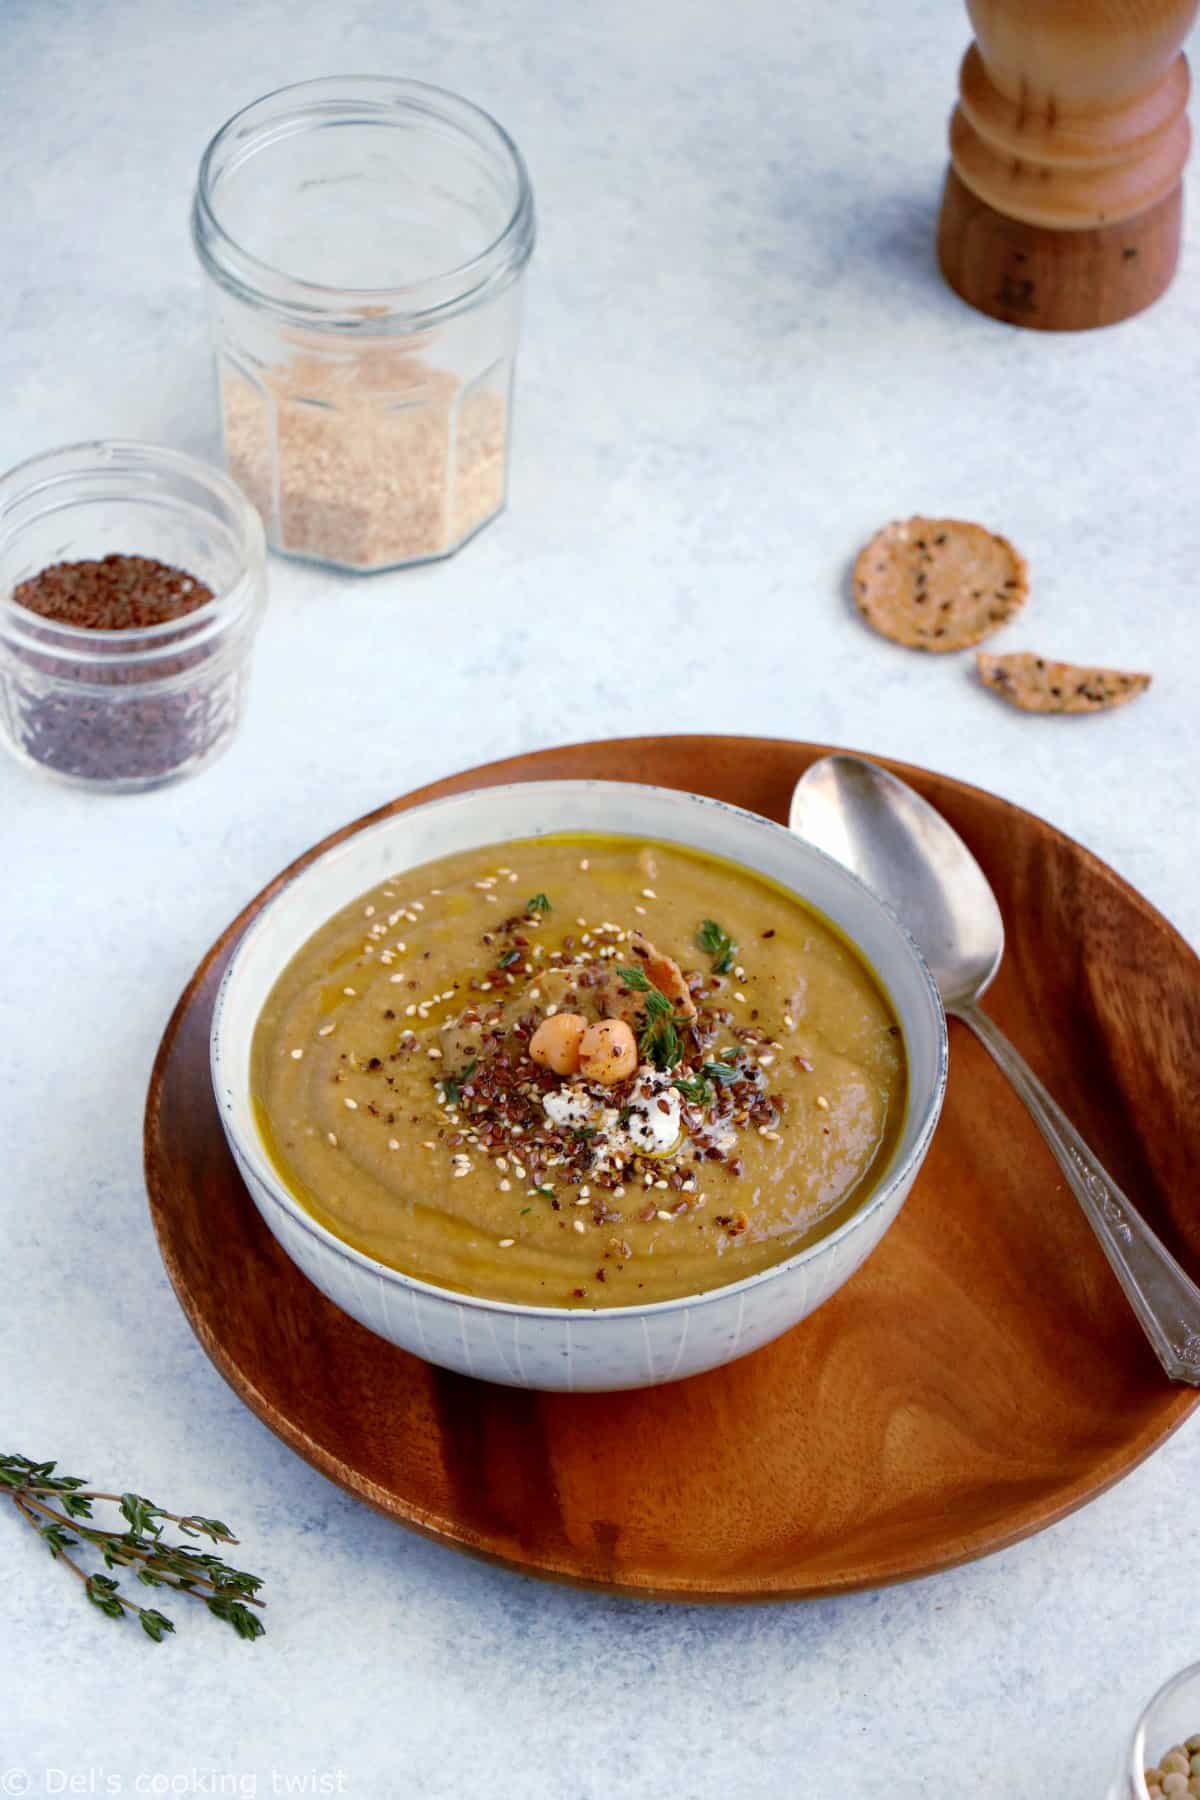 Grandma's nourishing lentil soup with roasted vegetables and all-spice is hearty, healthy, and packed with plant-based protein.